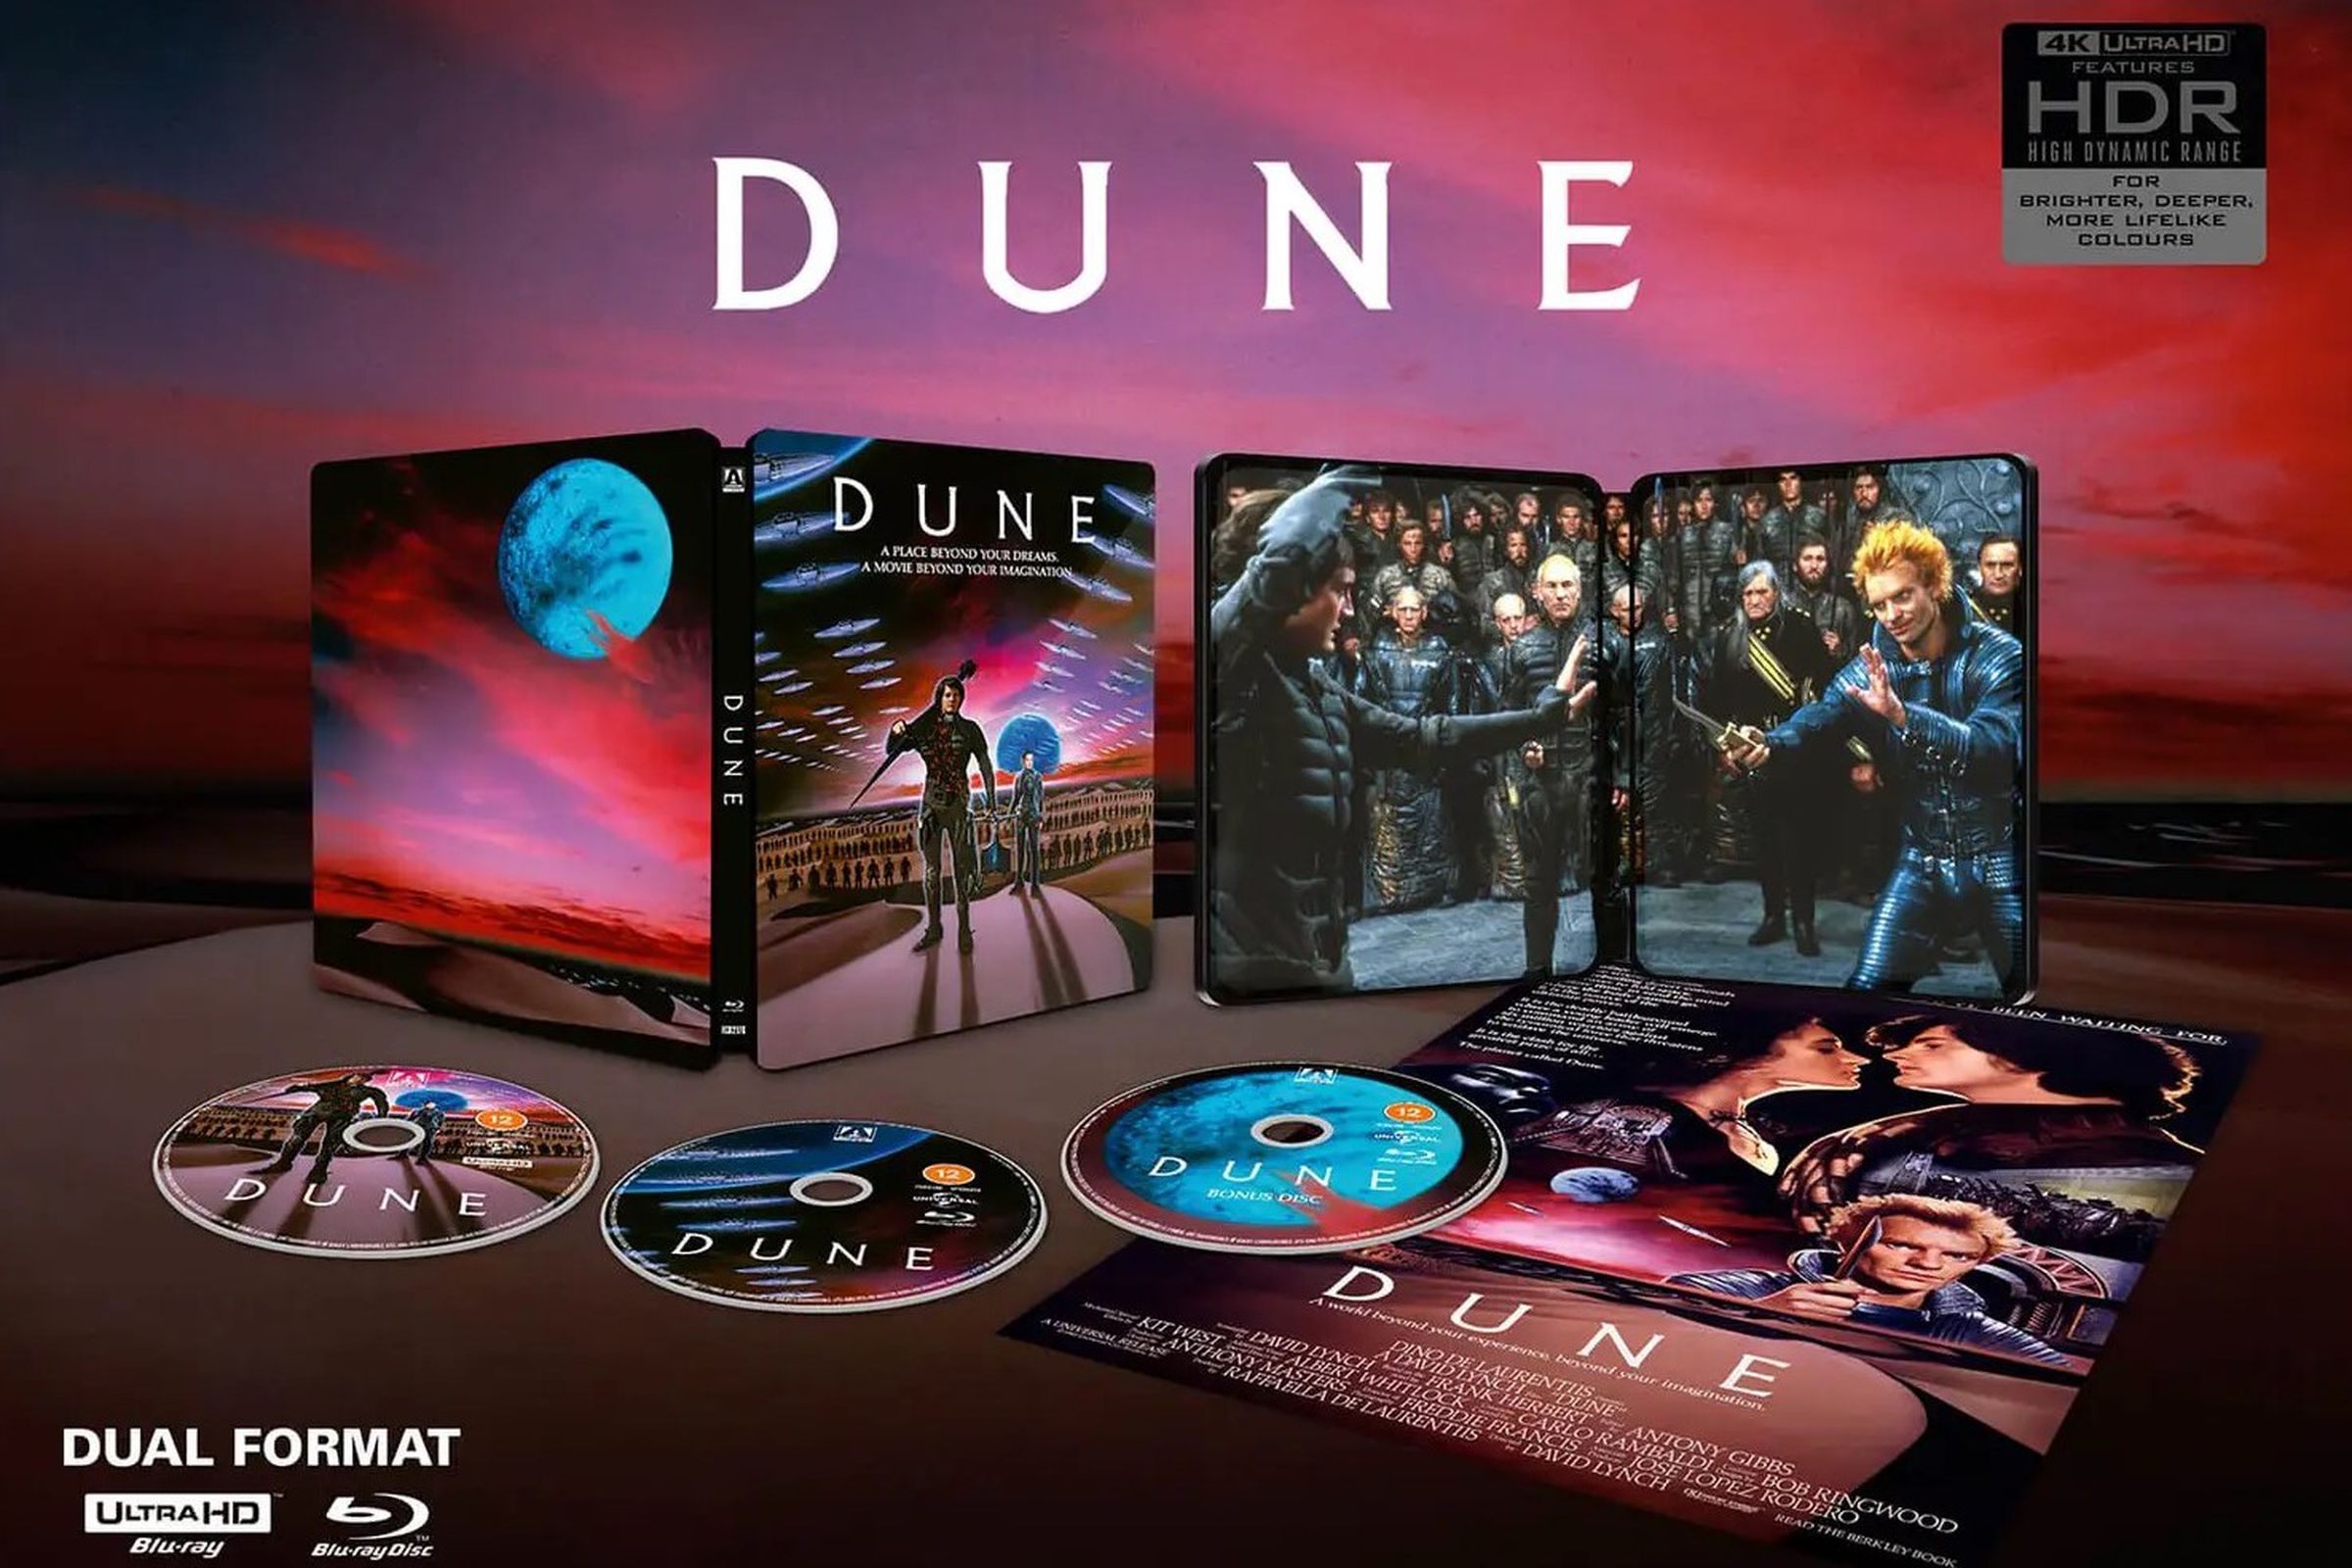 The steelbook edition comes with an extra copy of the film on Blu-ray.